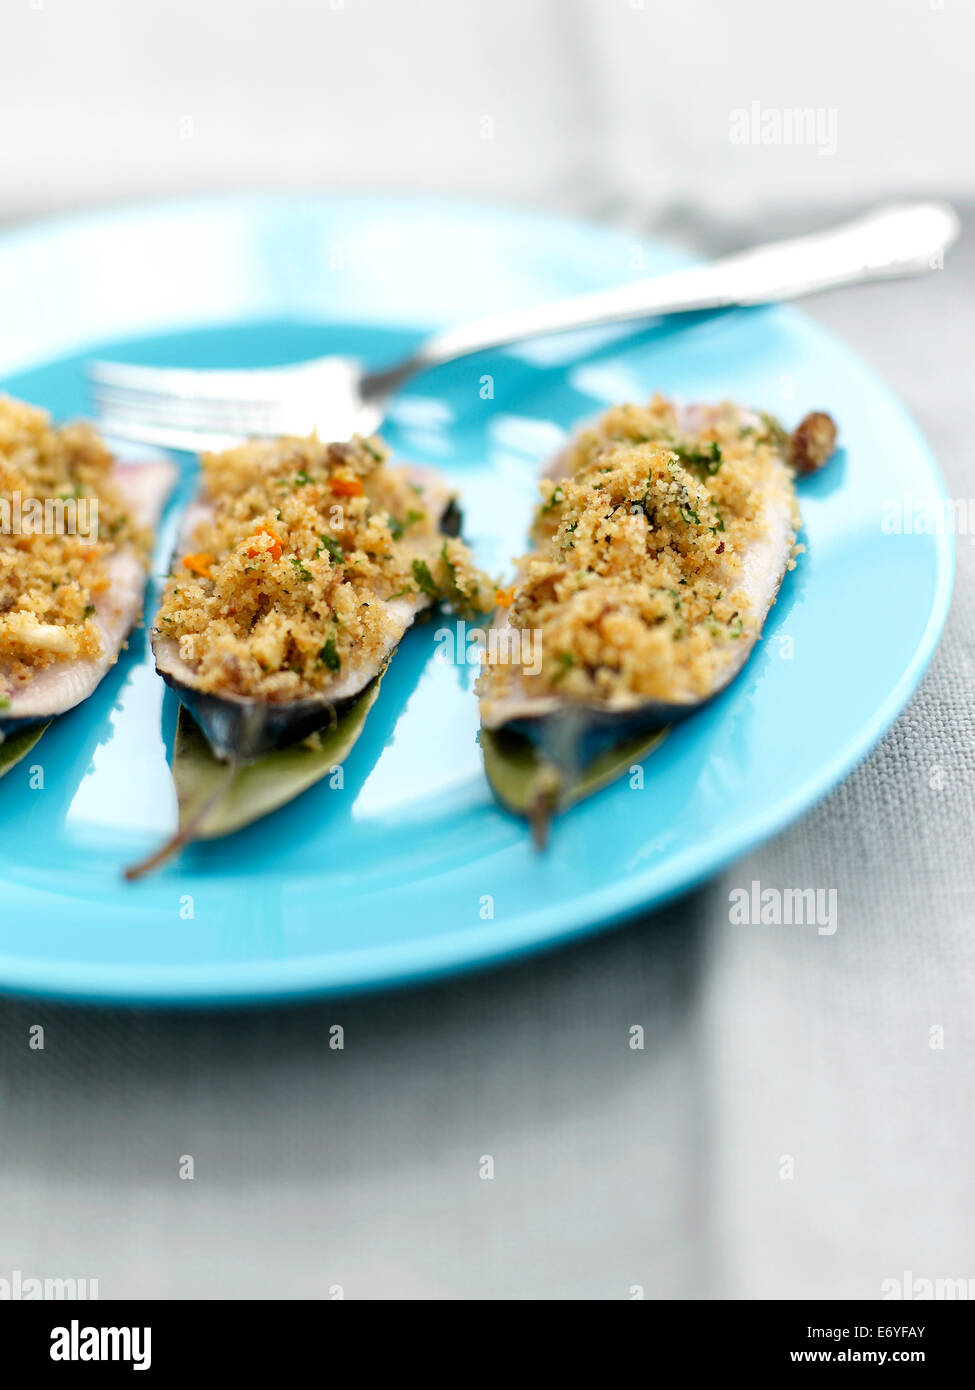 Sardines stuffed with pine nuts,bread crumbs and raisins,bay leaves and orange sauce Stock Photo